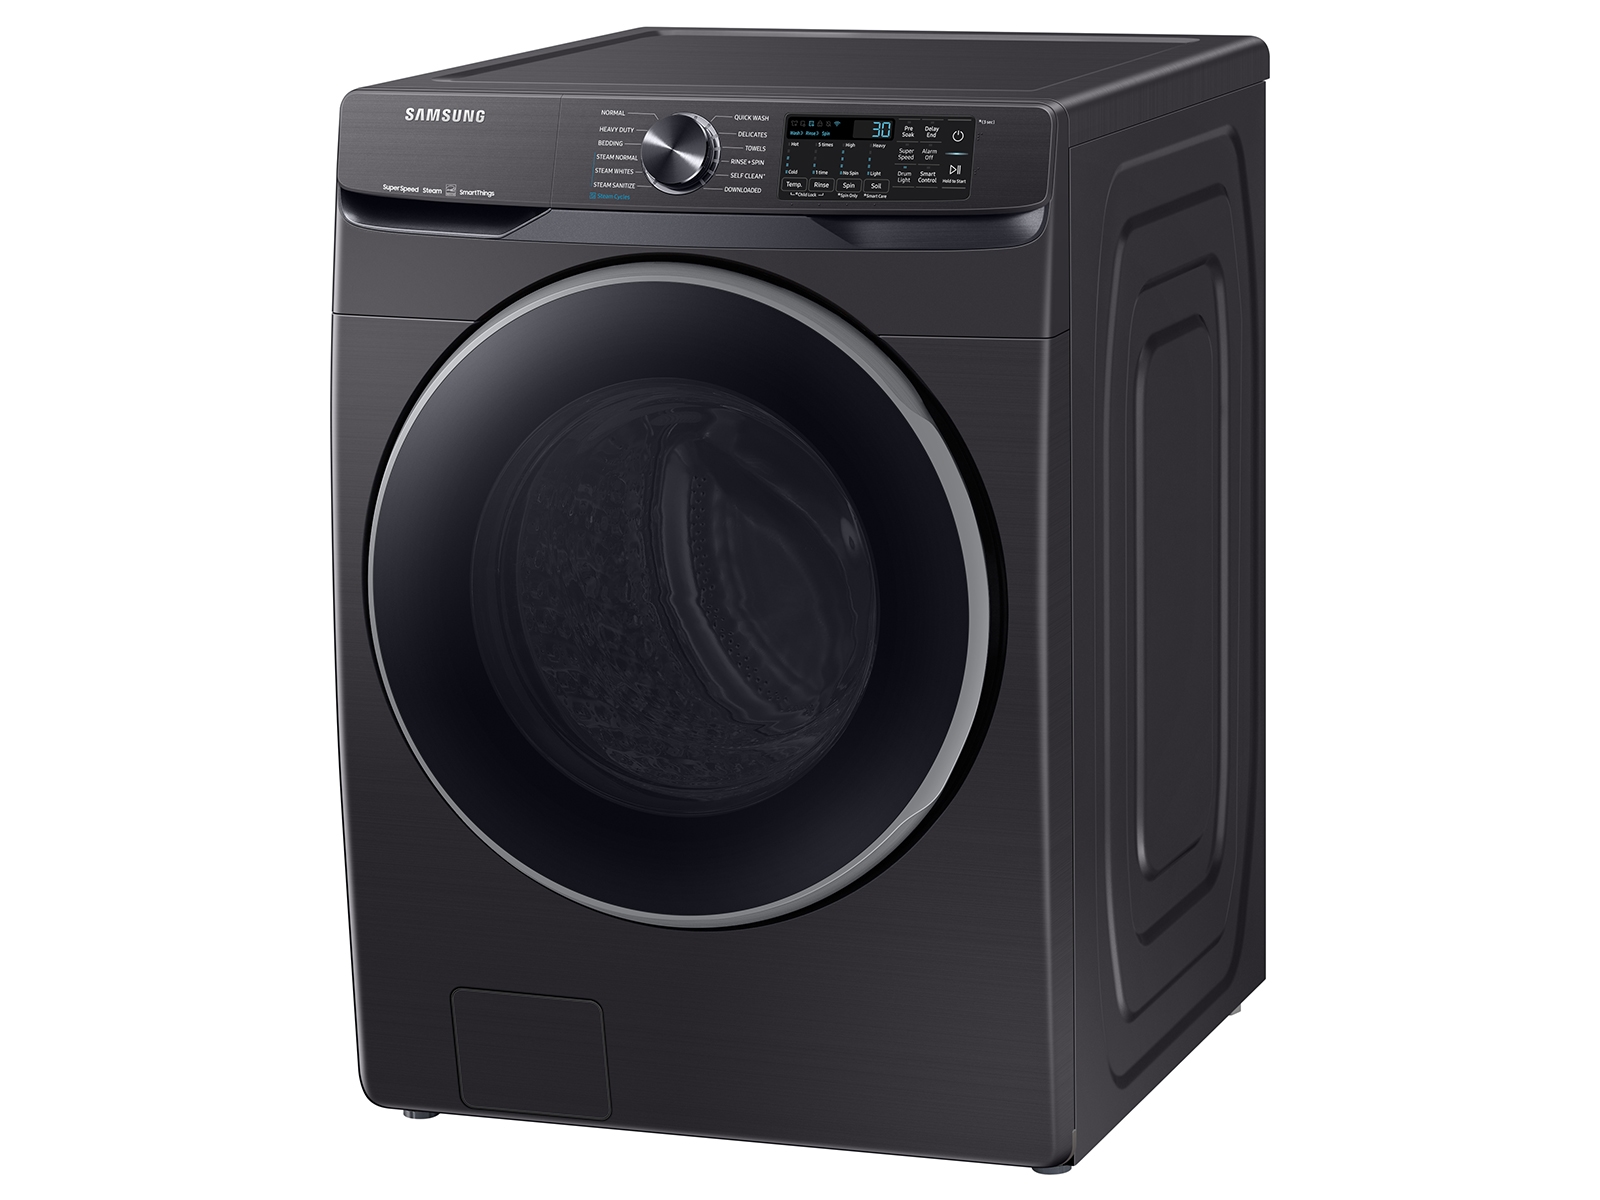 Portable Washer Dryer Combo : Target